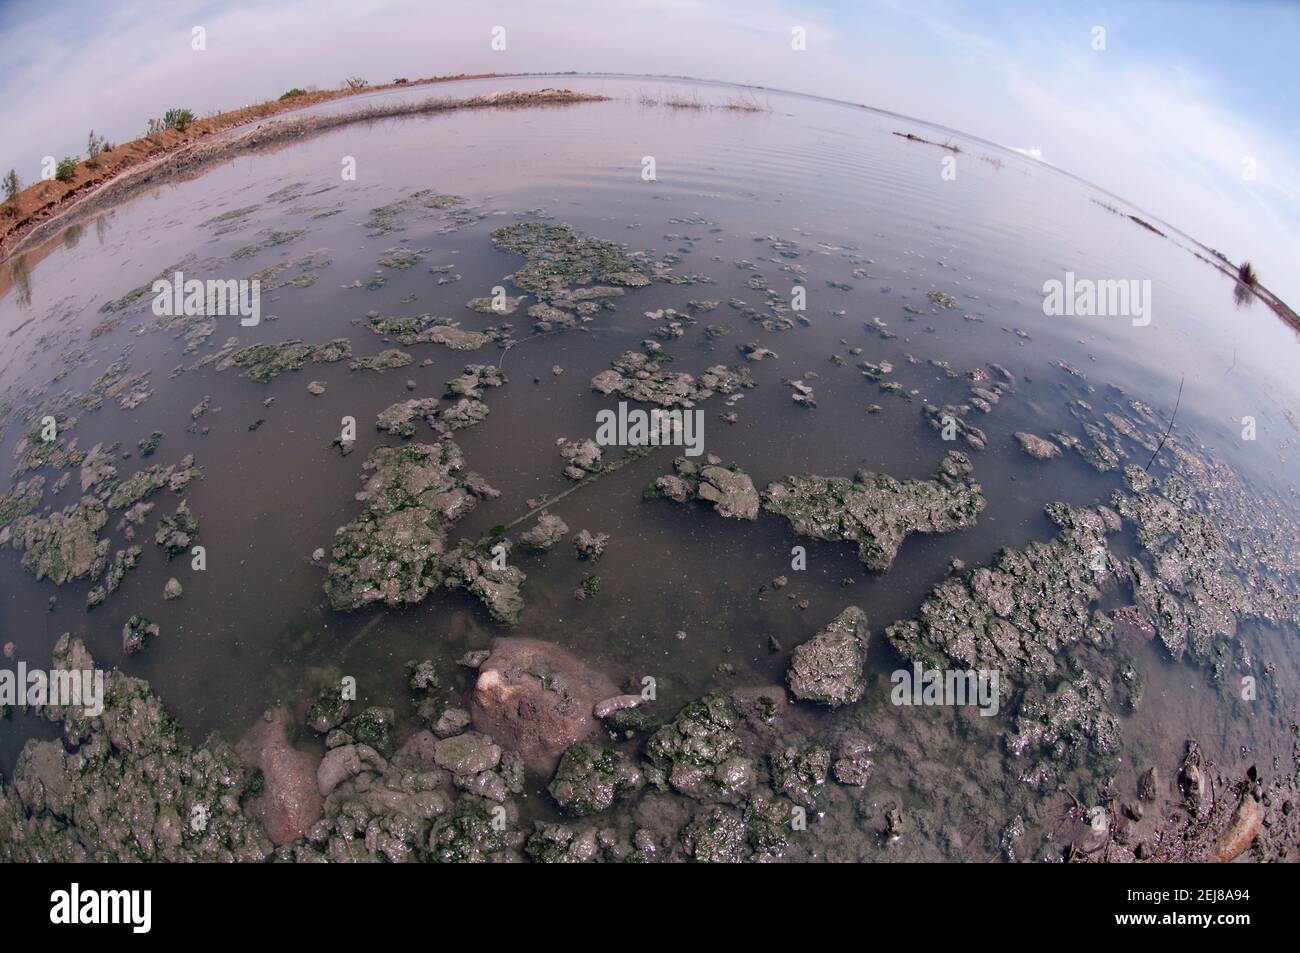 Mud lake environmental disaster which developed after drilling incident, Porong Sidoarjo, near Surabaya, East Java, Indonesia Stock Photo